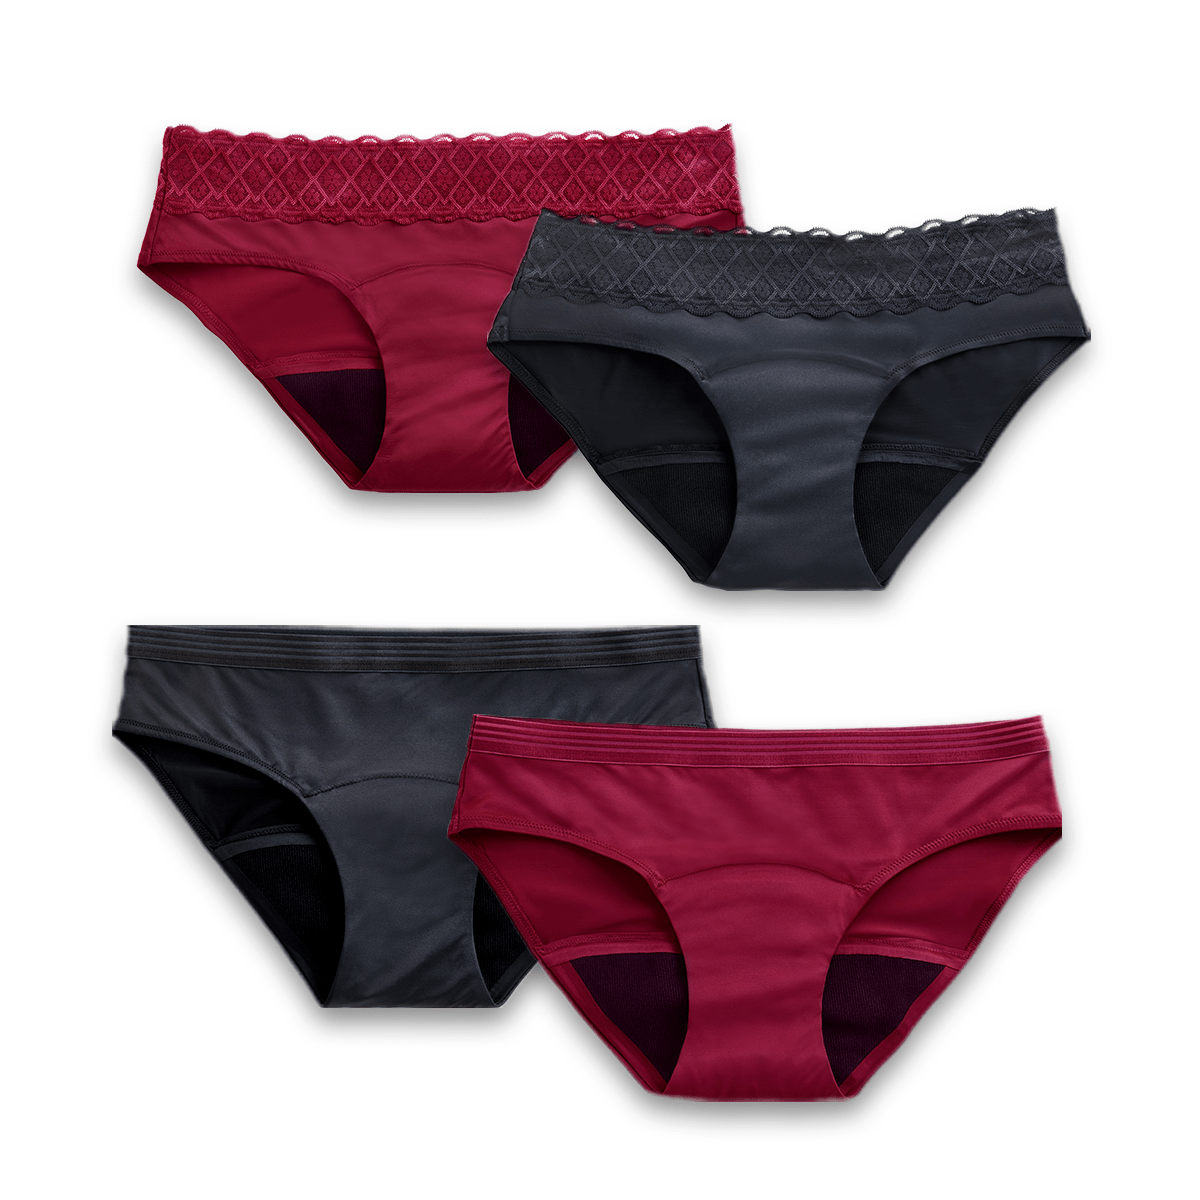 Imagen Inactiva Combo Hipster Negro + Hipster Vinotinto + Bikini Vinotinto + Bikini Negro - Flujo Regular 1